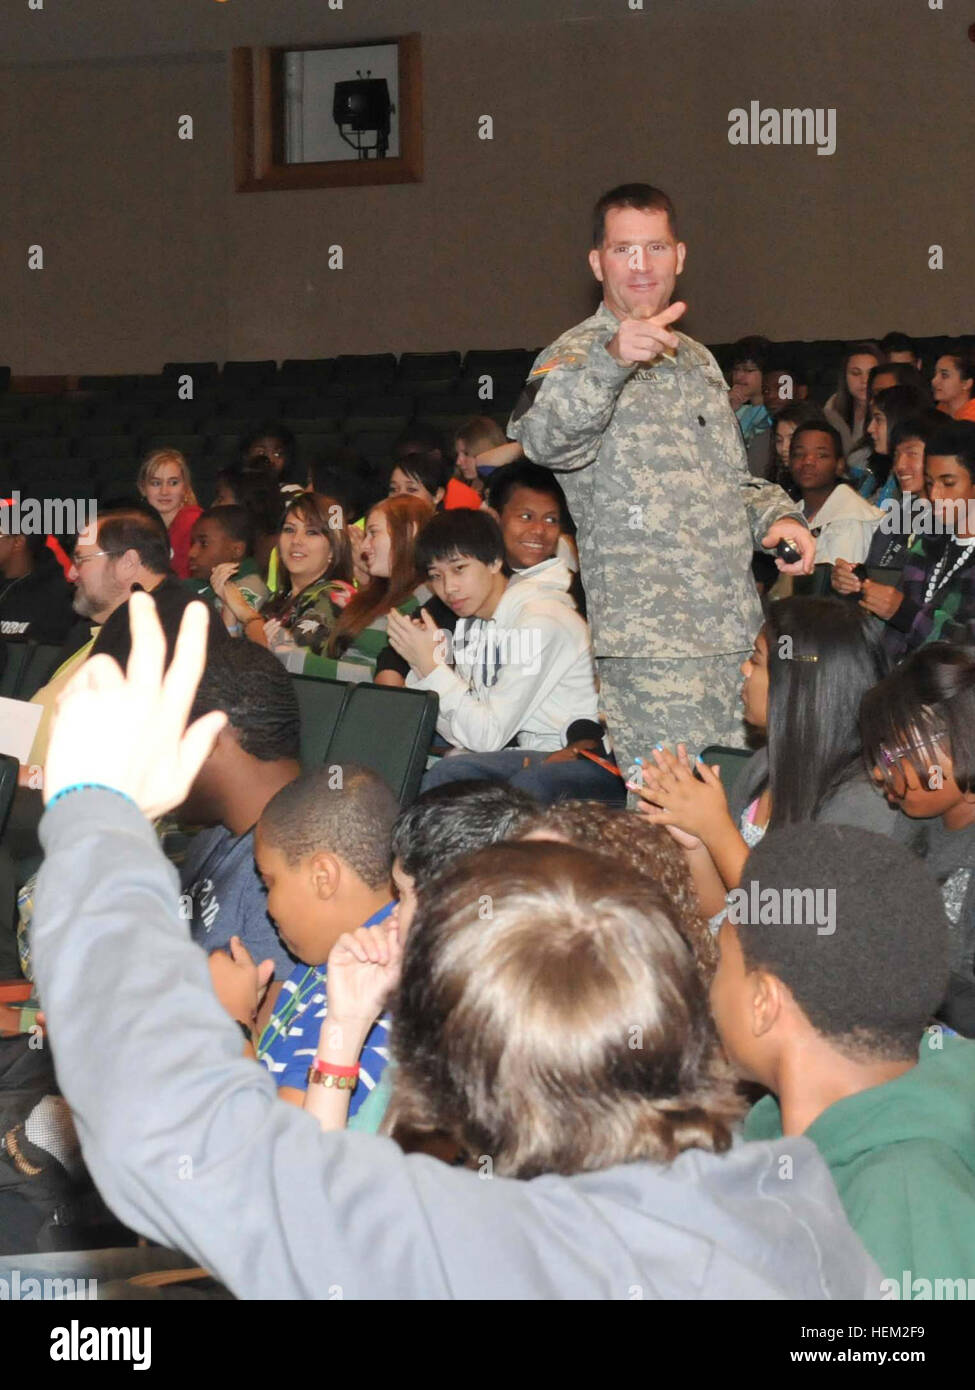 Students were eager to ask questions about the lessons which correlated Buffalo Soldiers and the 9th Cavalry Regiment as well as personal questions to Lt. Col. Cameron Cantlon, the commander for the 6th Squadron, 9th Cavalry Regiment, 3rd Brigade Combat Team, 1st Cavalry Division. This is part of Adopt-a-School program held at Ellison High School, Feb. 8, 2012. Saber Squadron commemorates black history at Ellison High School 120208-A--027 Stock Photo